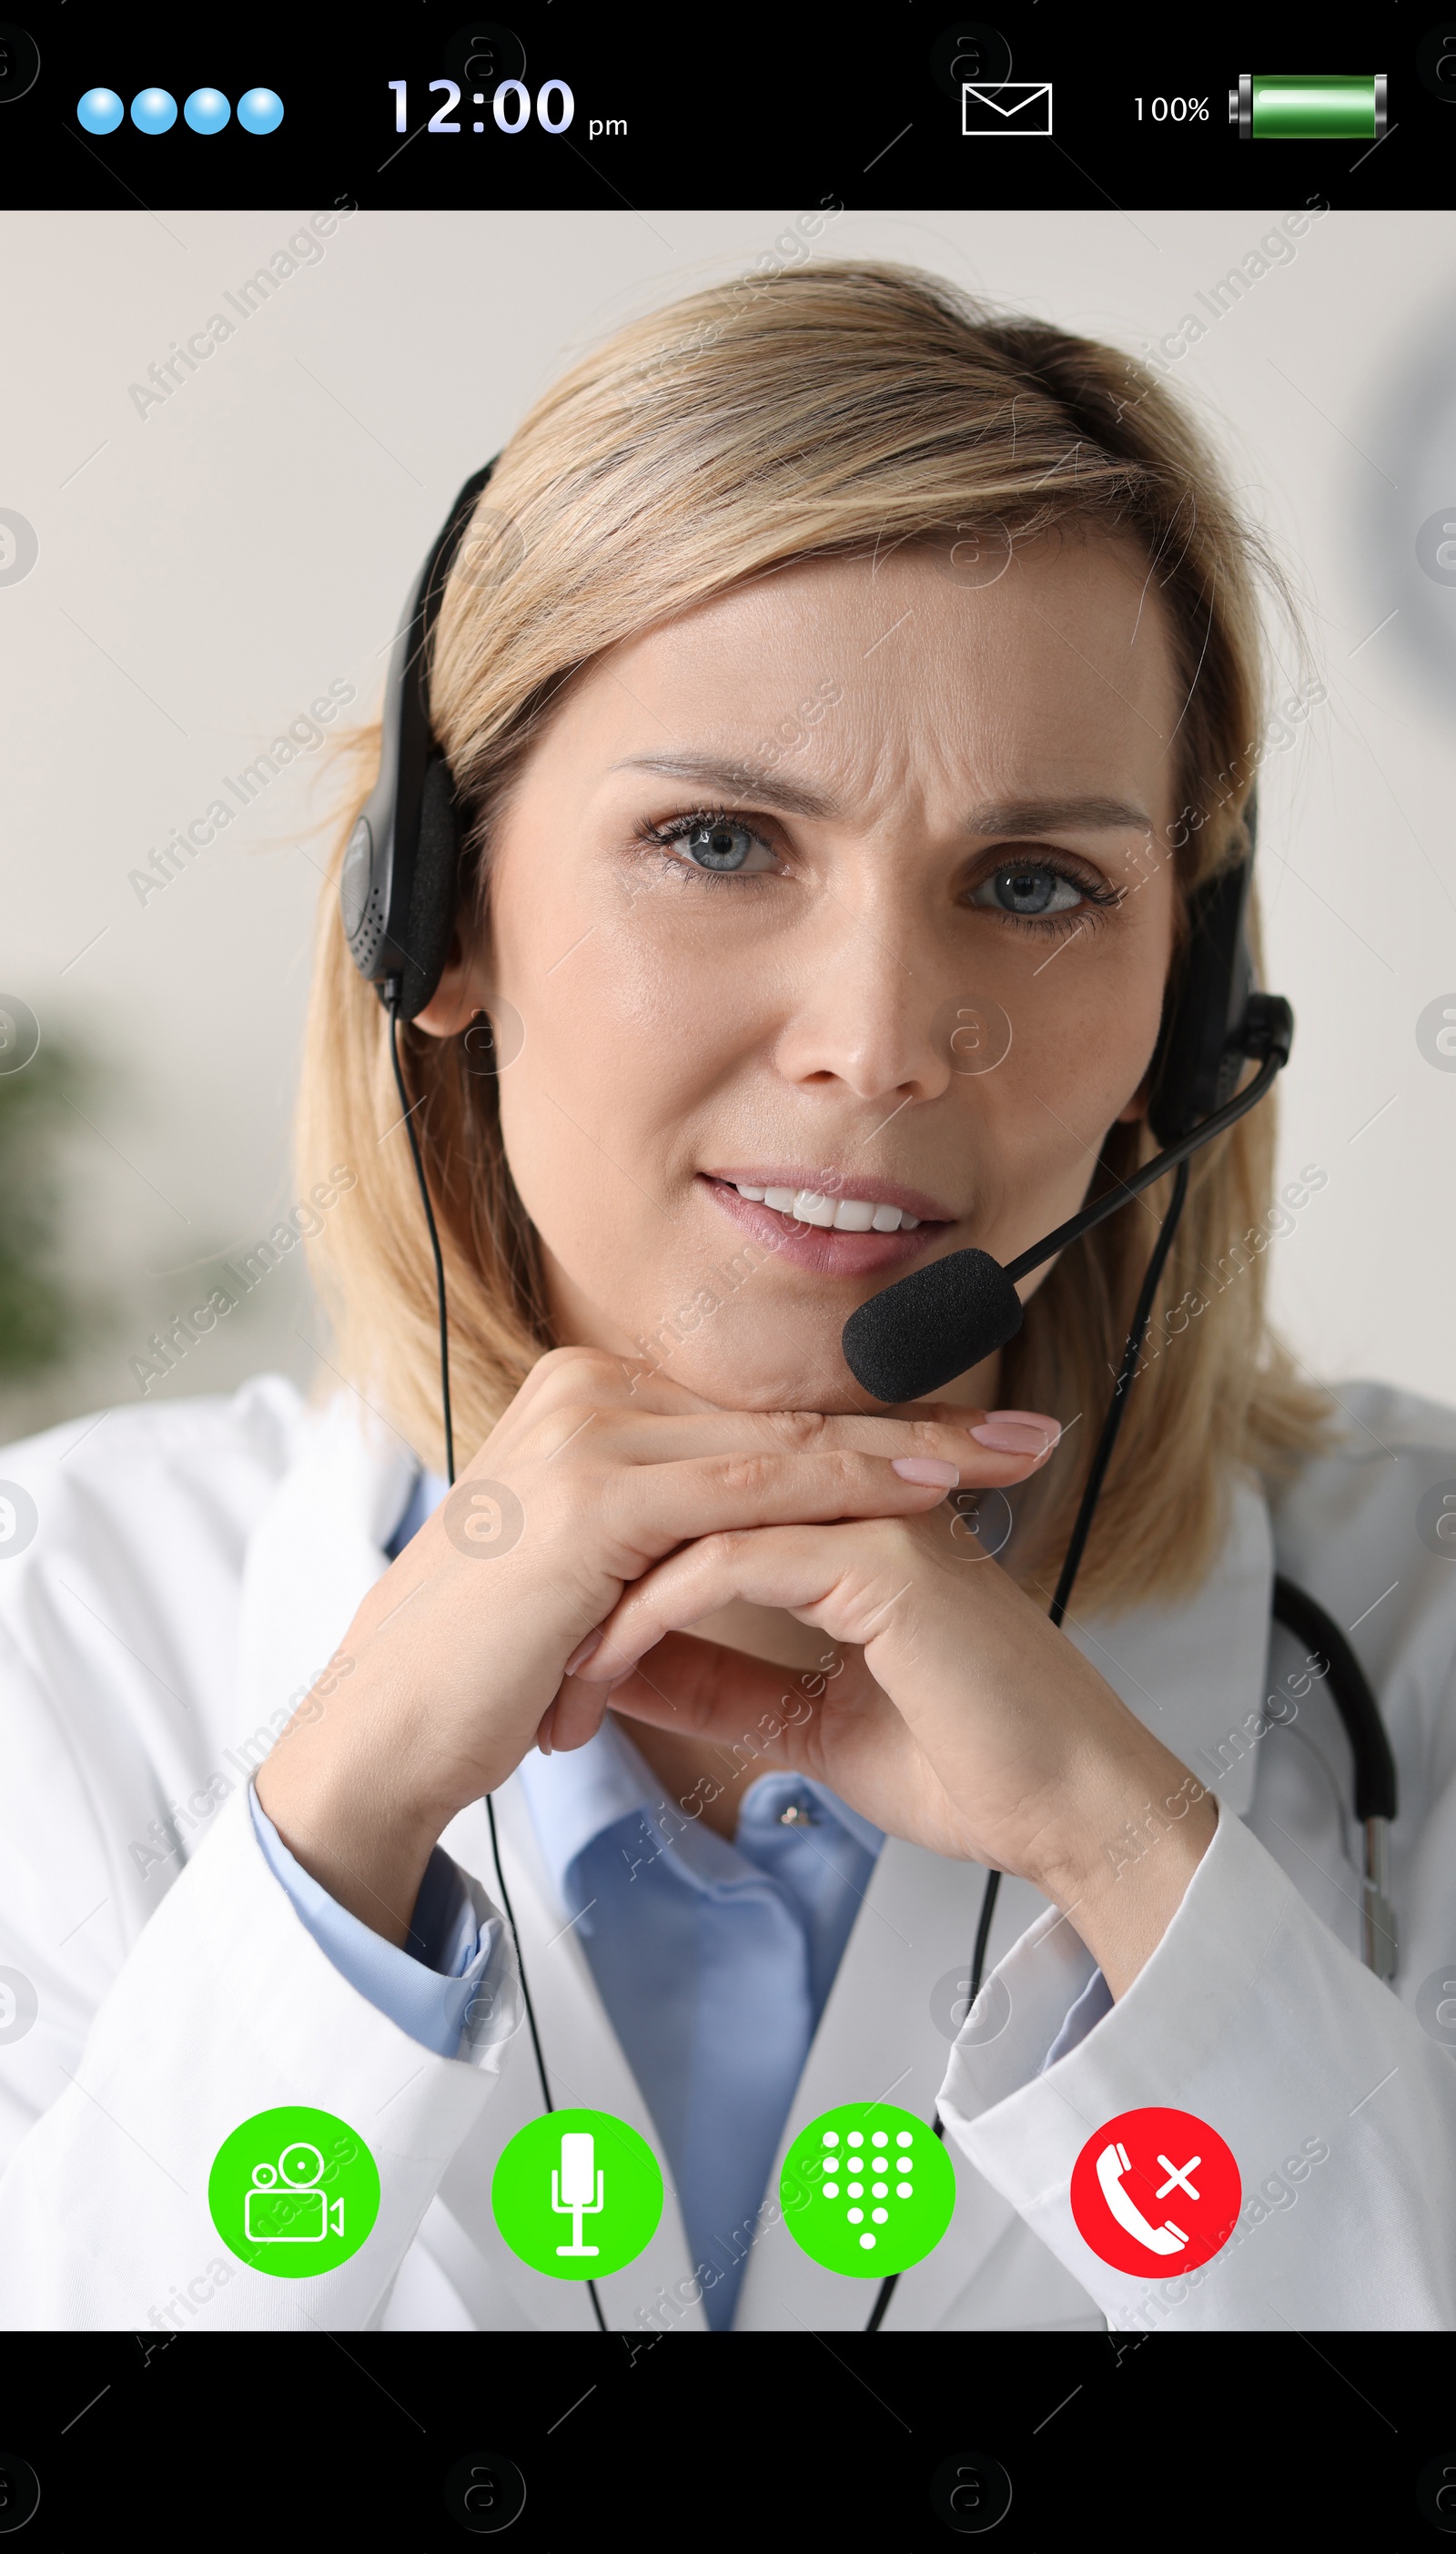 Image of Online medical consultation. Doctor with headset working via video chat application